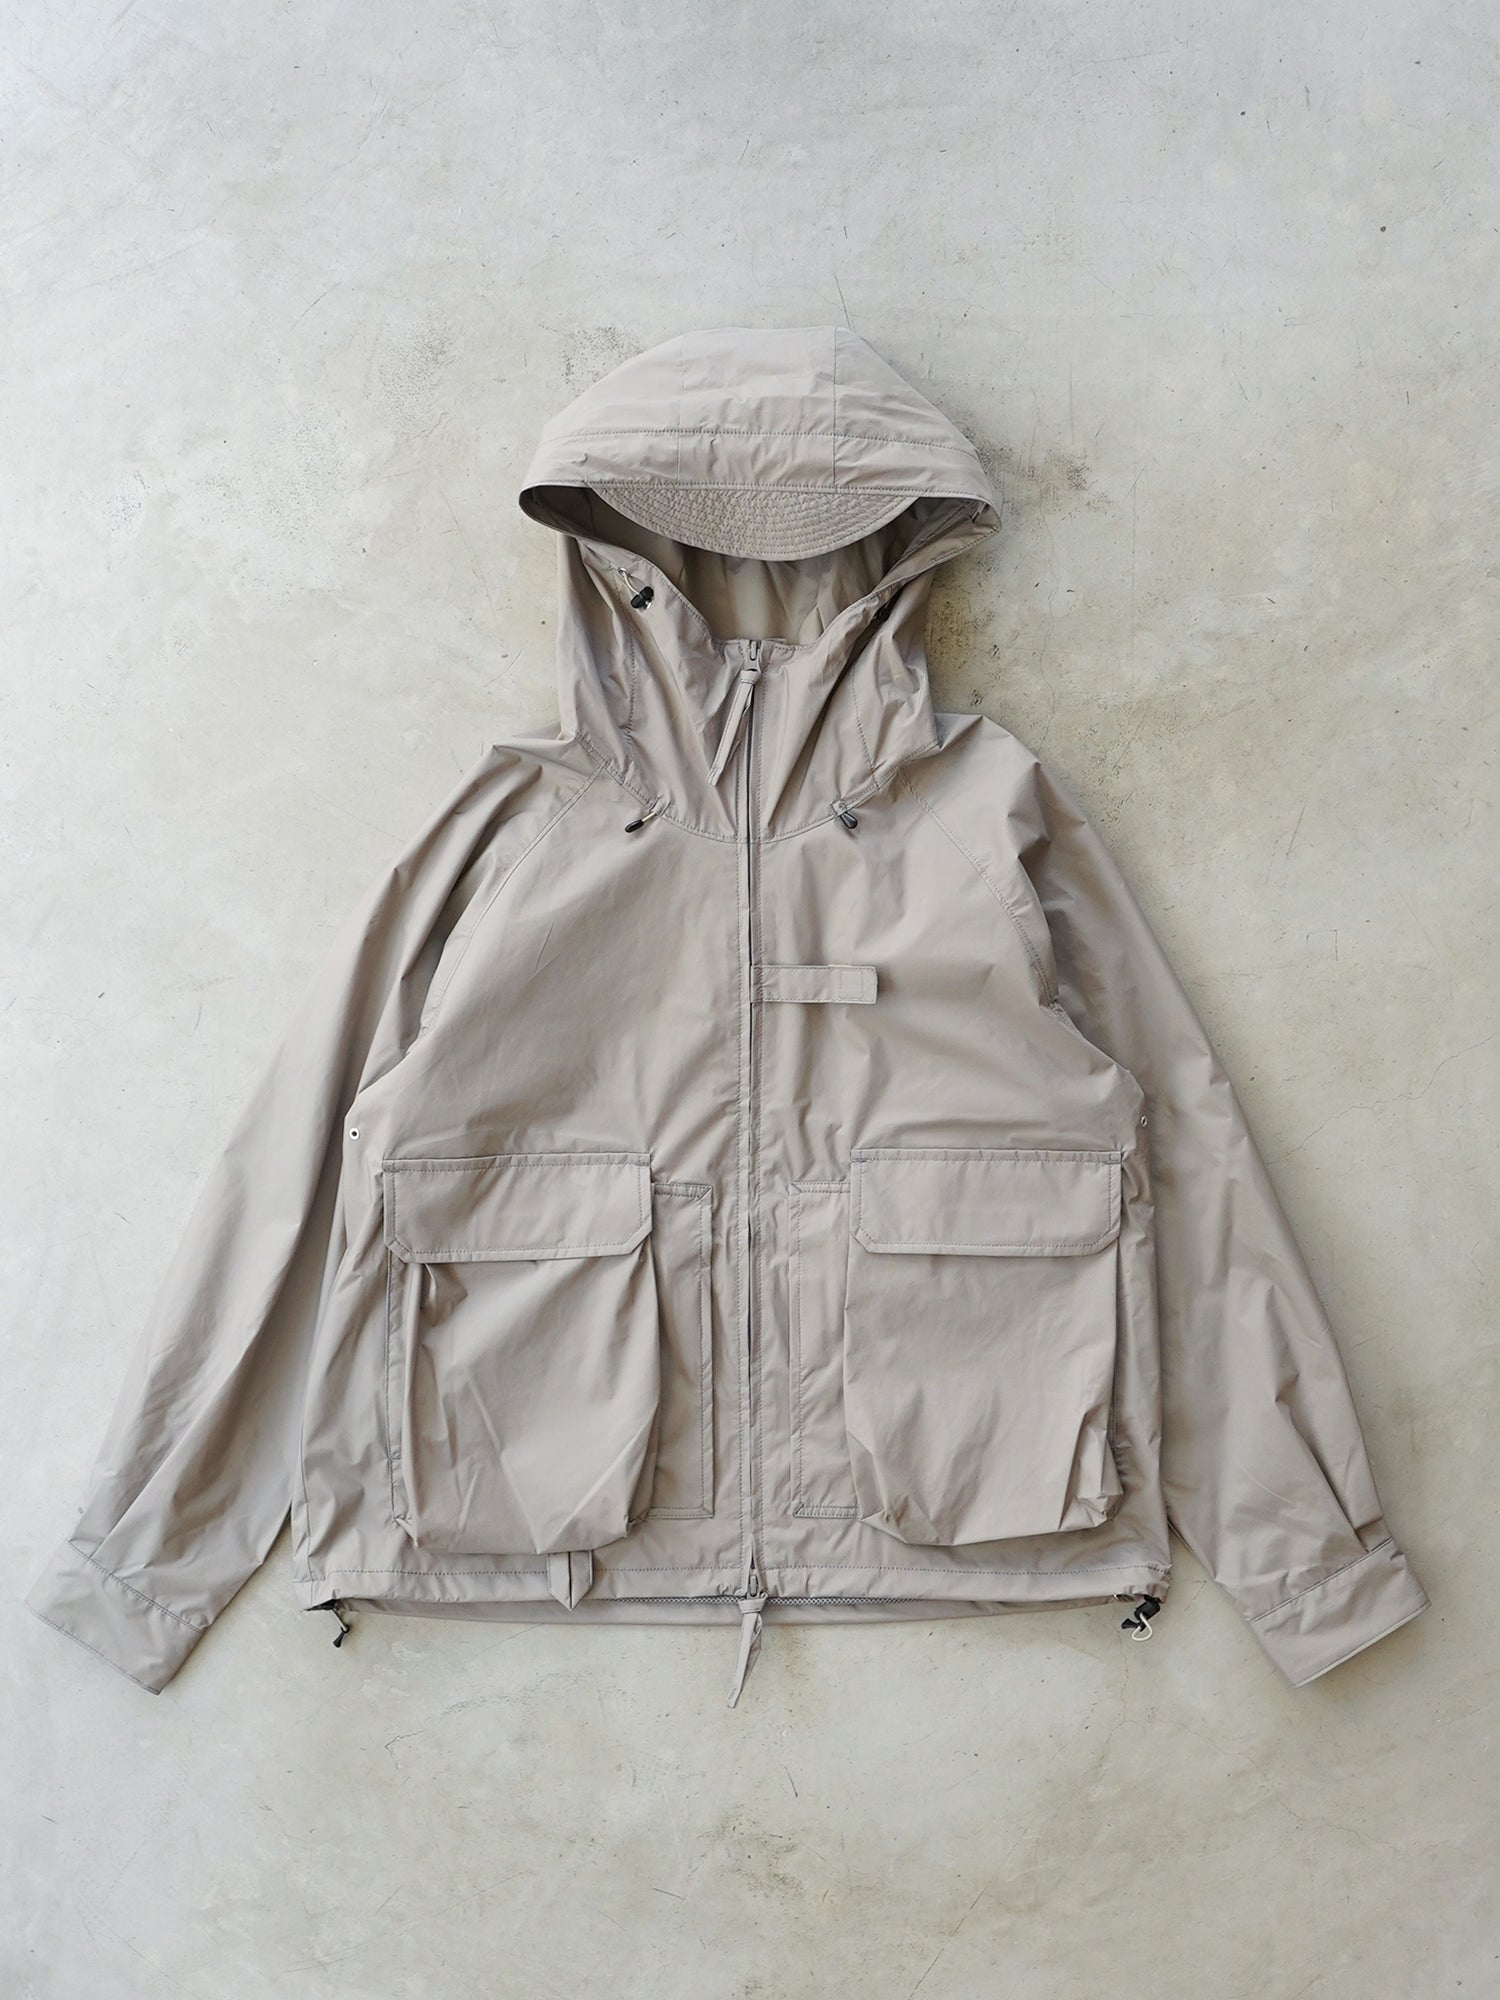 ENDS and MEANS Haggerston Parka – CUXTON HOUSE